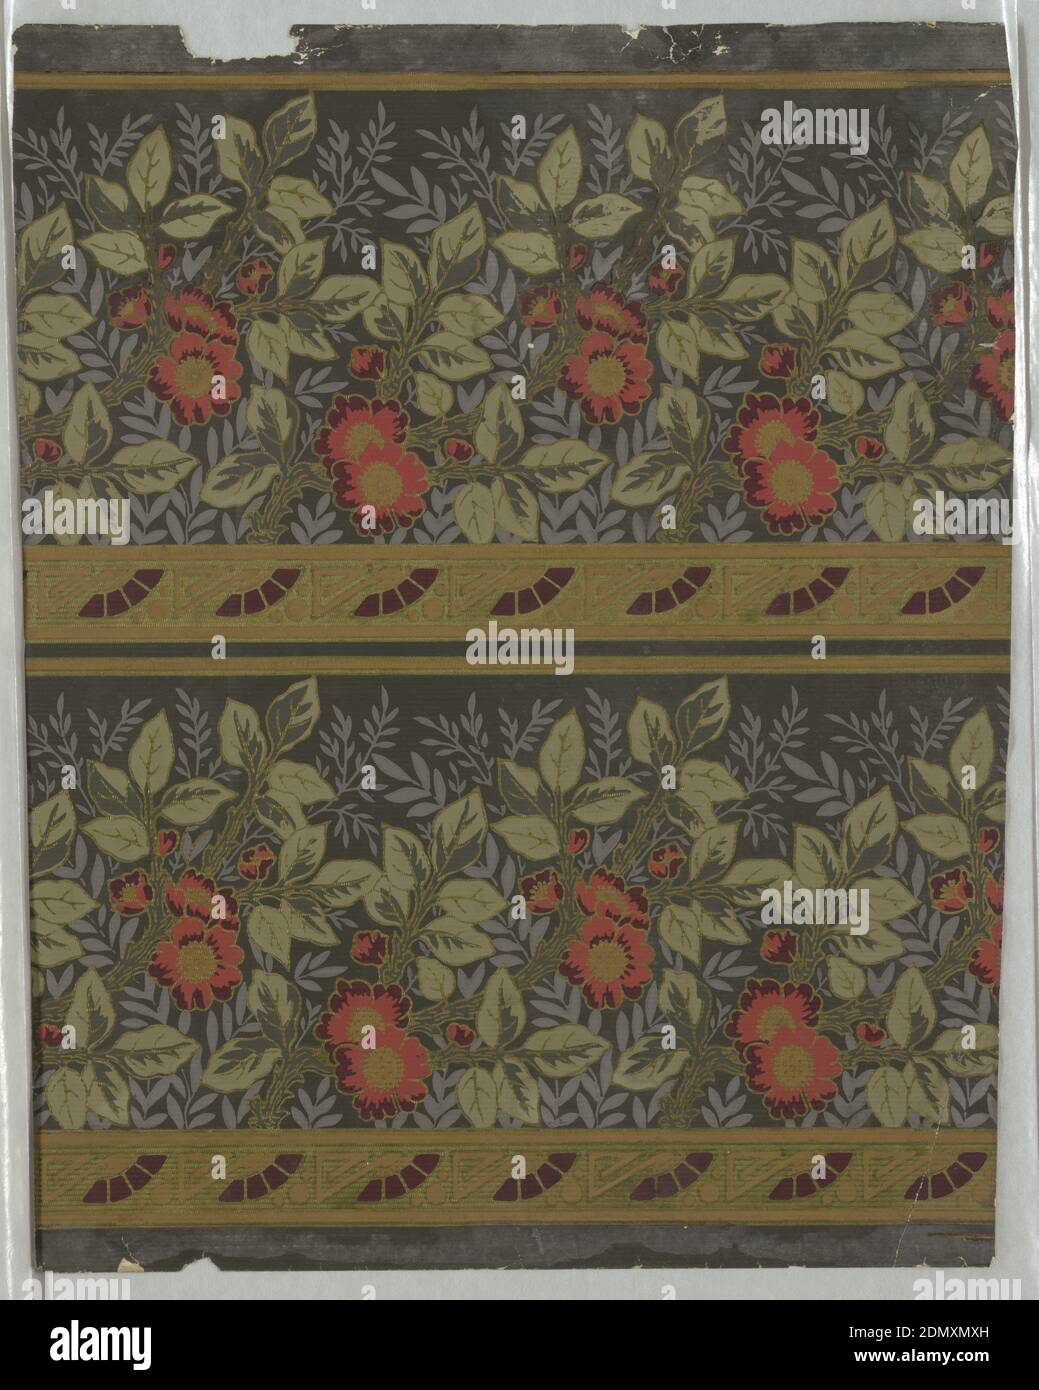 Border, Machine-printed, embossed, Two uncut identical borders. A profuse design of single five-petalled roses and sprays of leaves. In background are sprays of ferns. At bottom is a gold band with a fan-like motif. The field is entirely embossed in narrow thread-like horizontal lines., USA, 1890–1900, Wallcoverings, Border Stock Photo